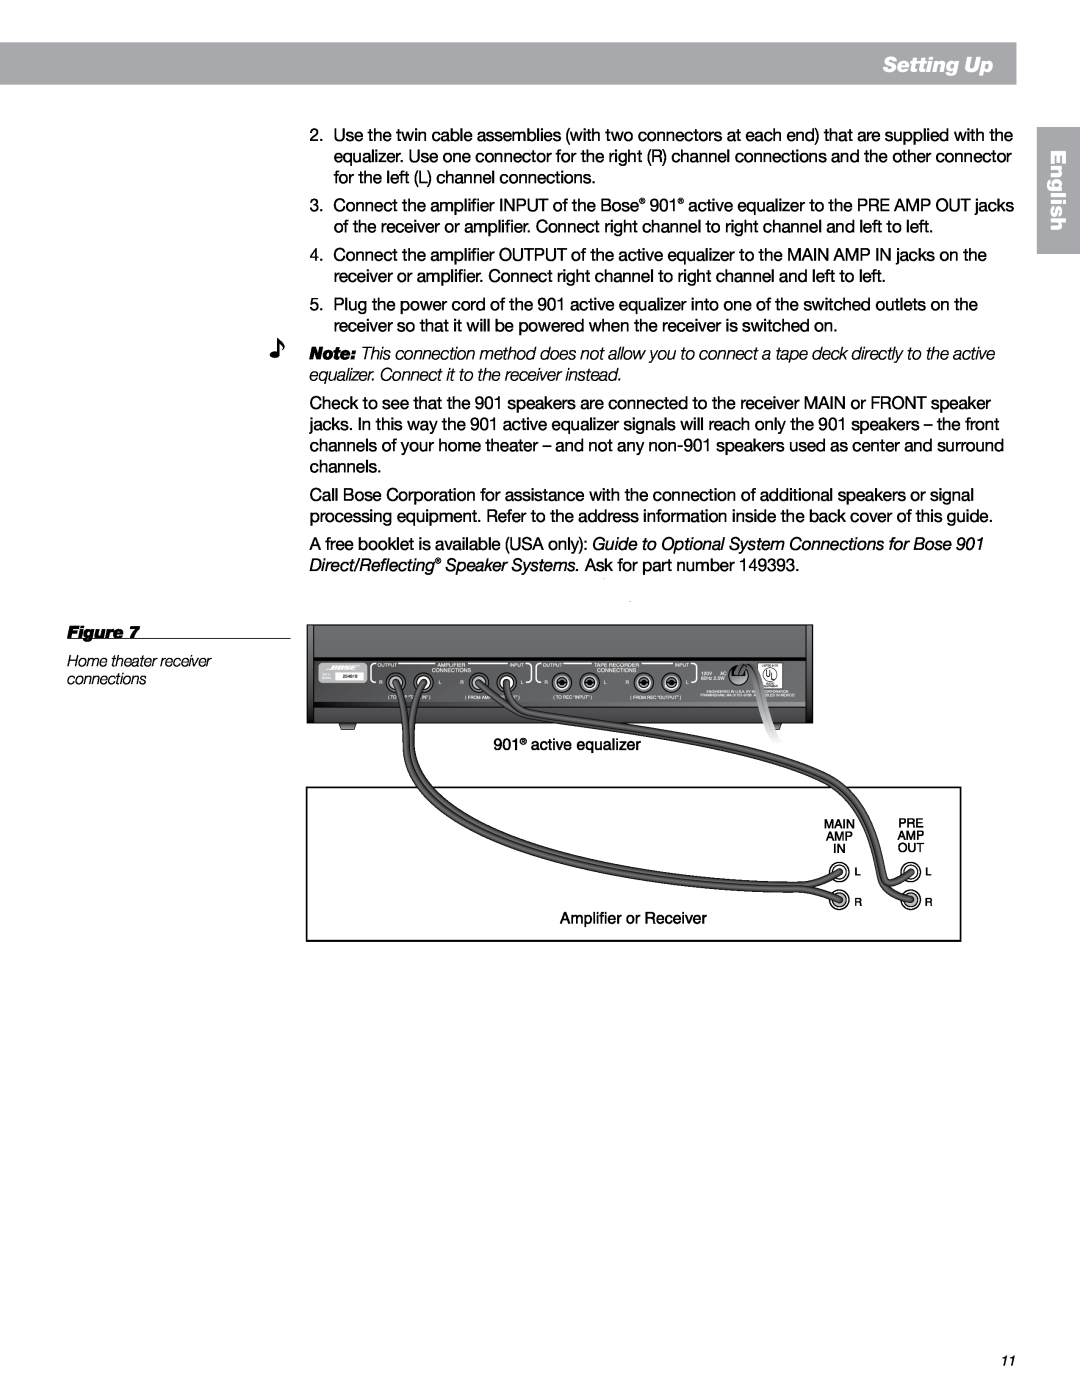 Bose 901 Series VI, 149393 manual Setting Up, English, Home theater receiver connections 